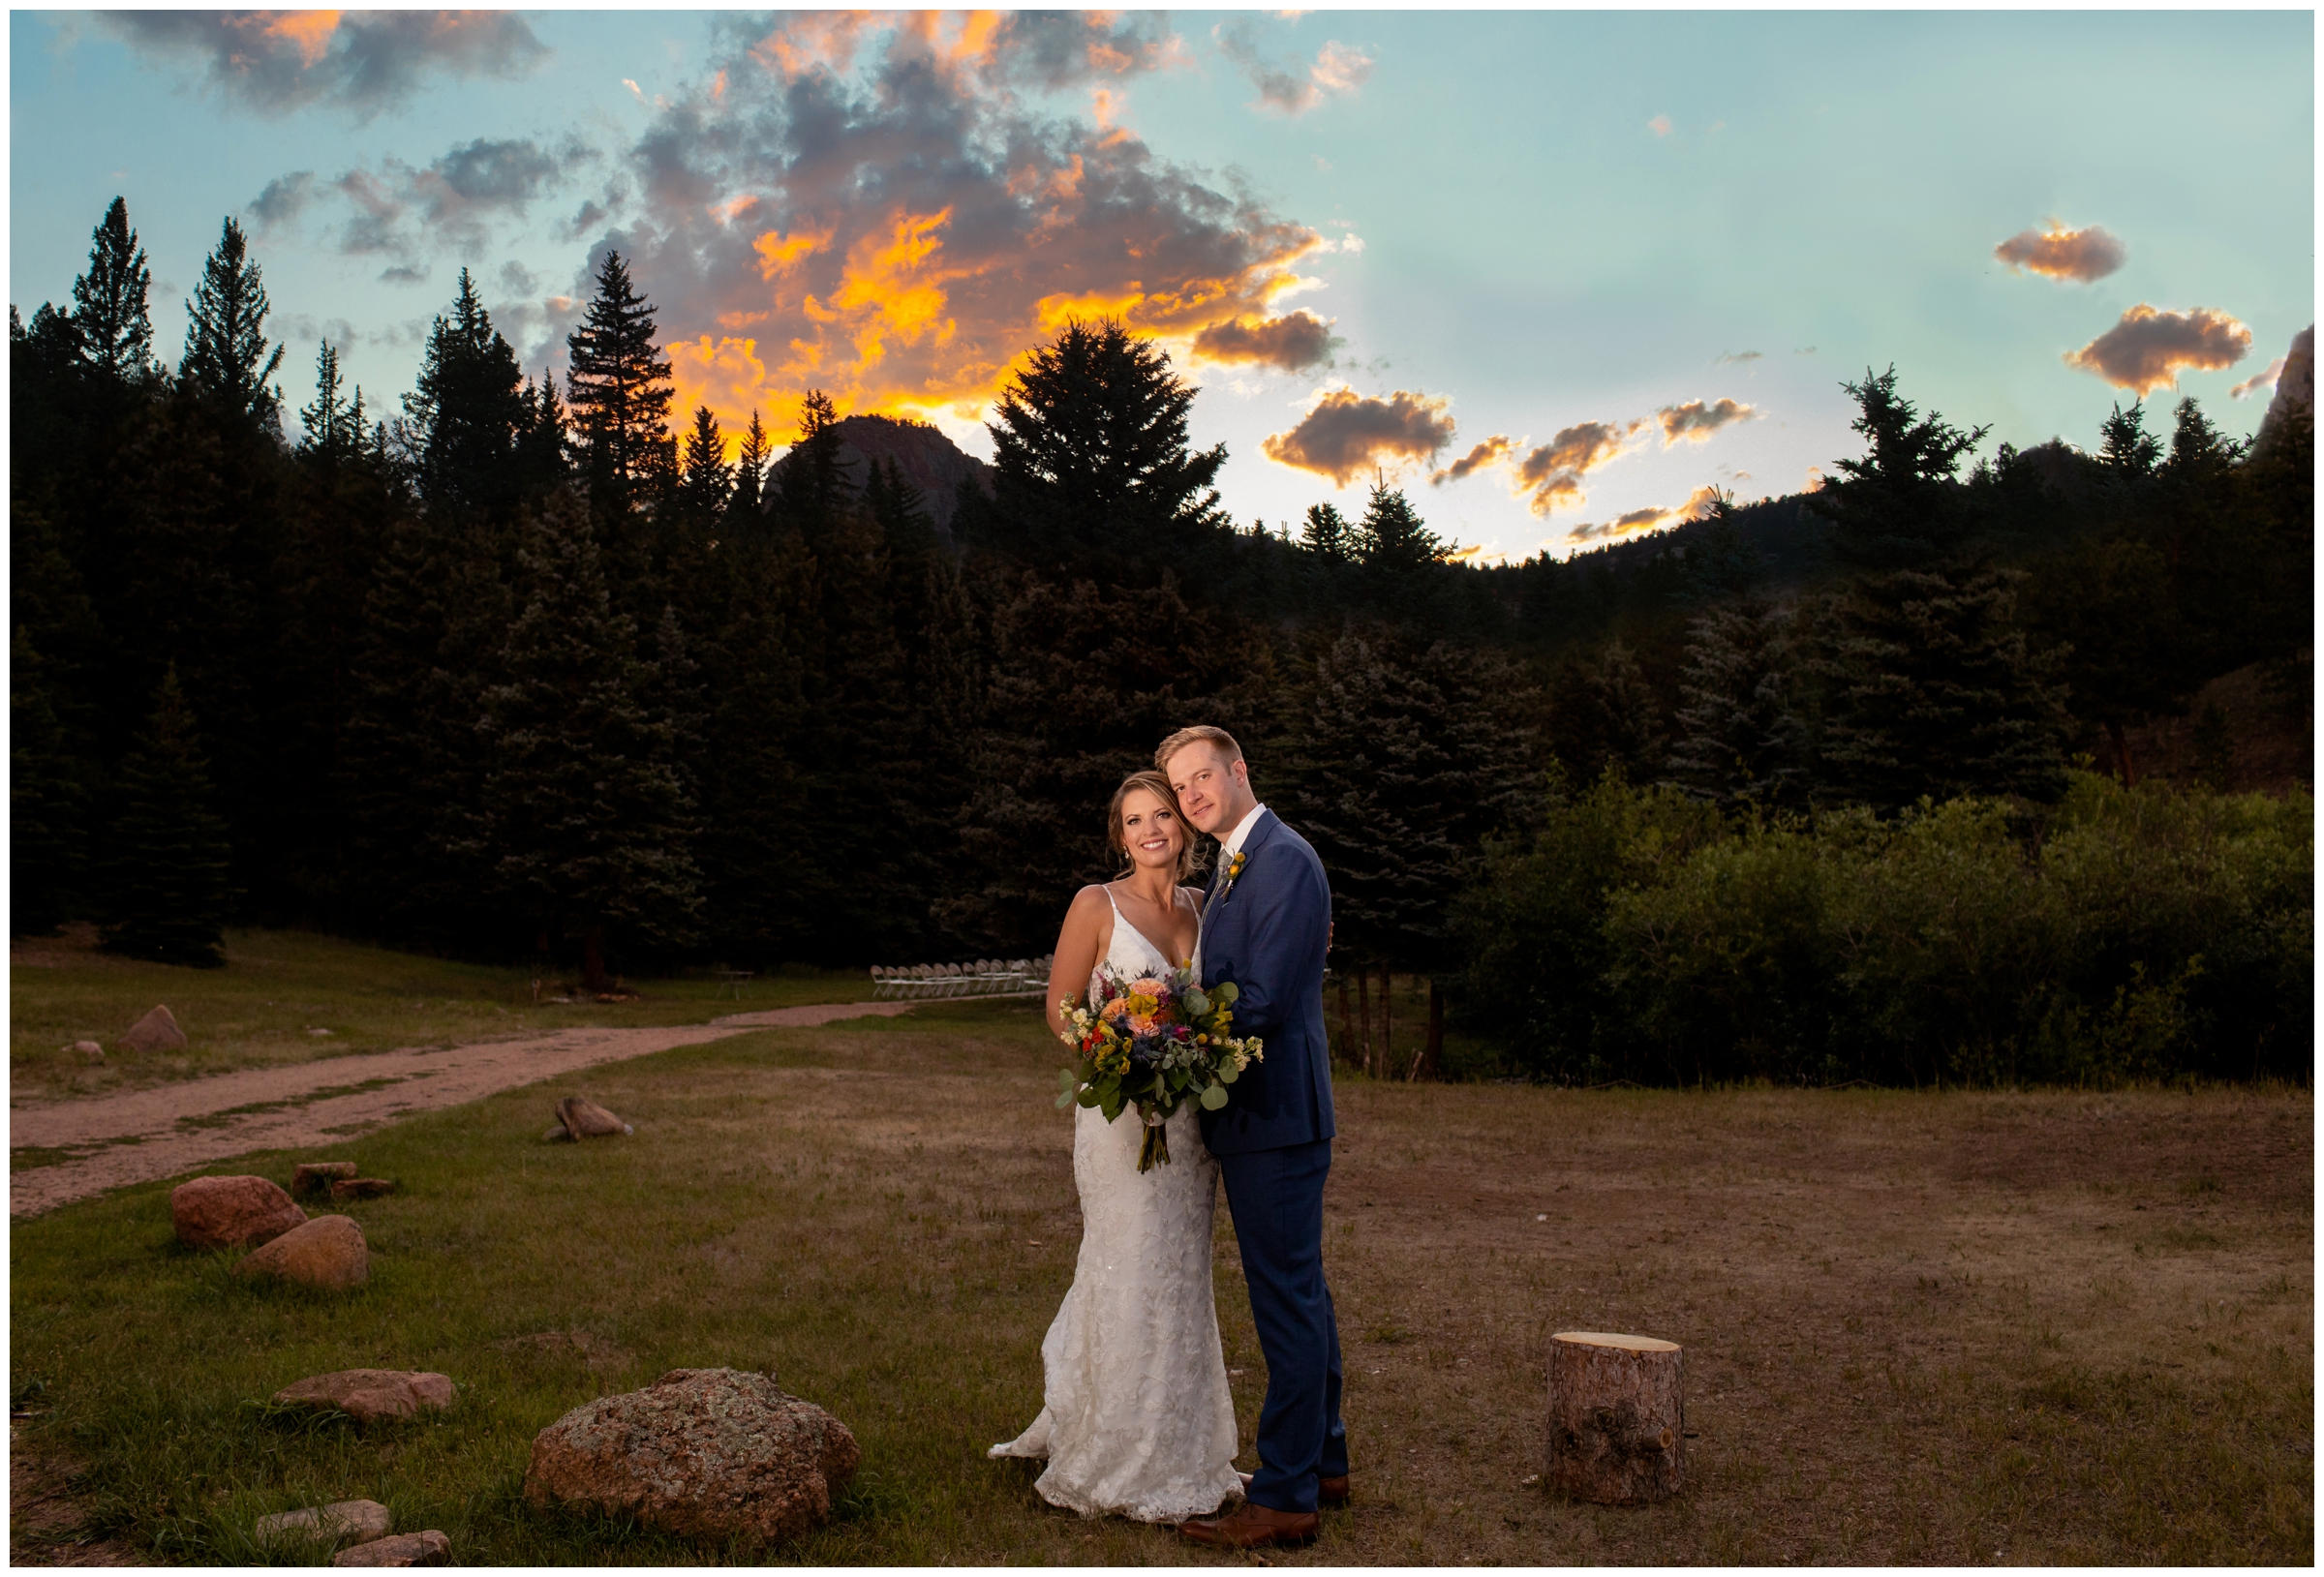 amazing sunset wedding photos at Mountain View Ranch Wedgewood by Plum Pretty Photography